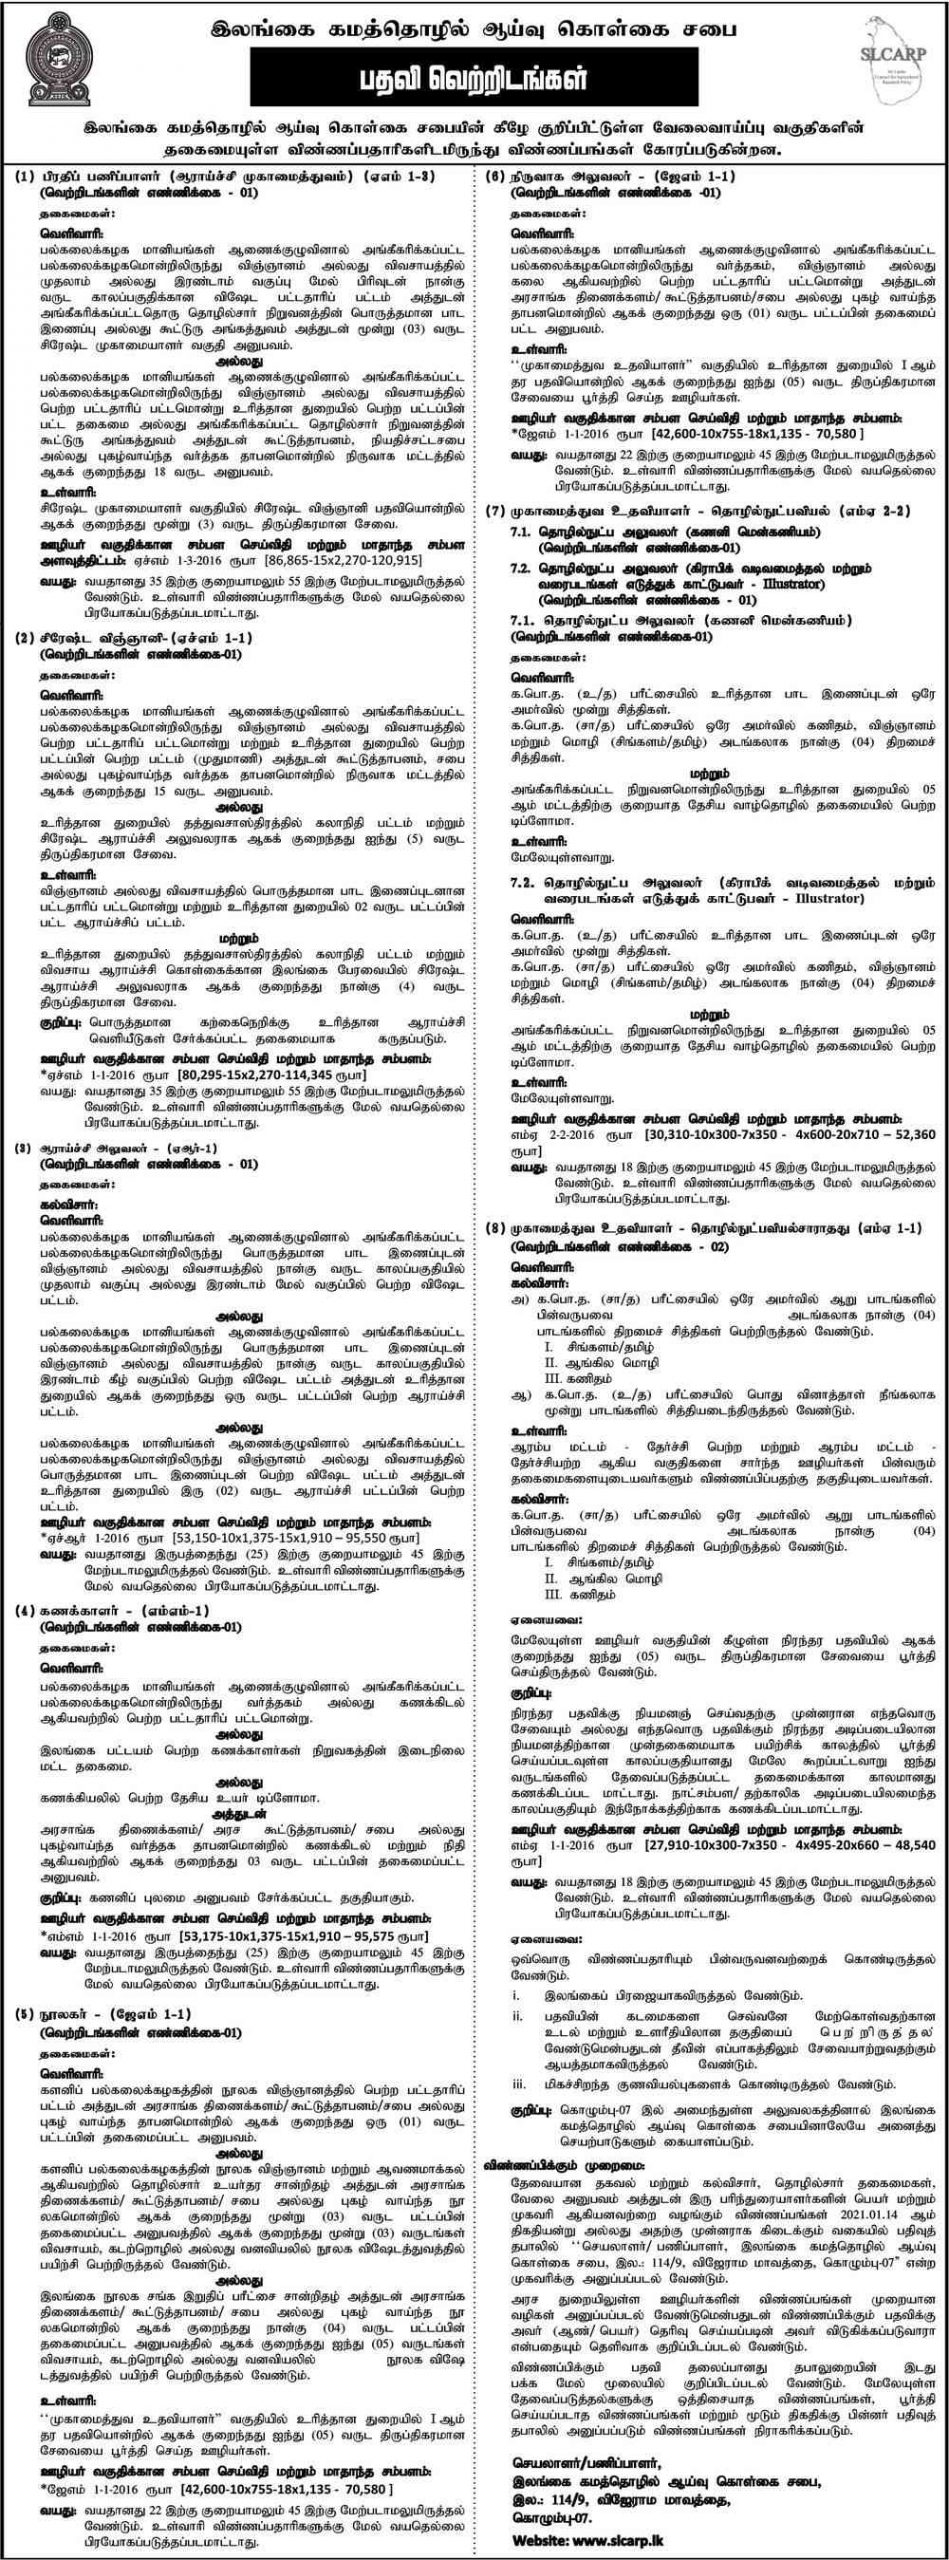 Sri Lanka Council for Agricultural Research Policy Vacancies Tamil